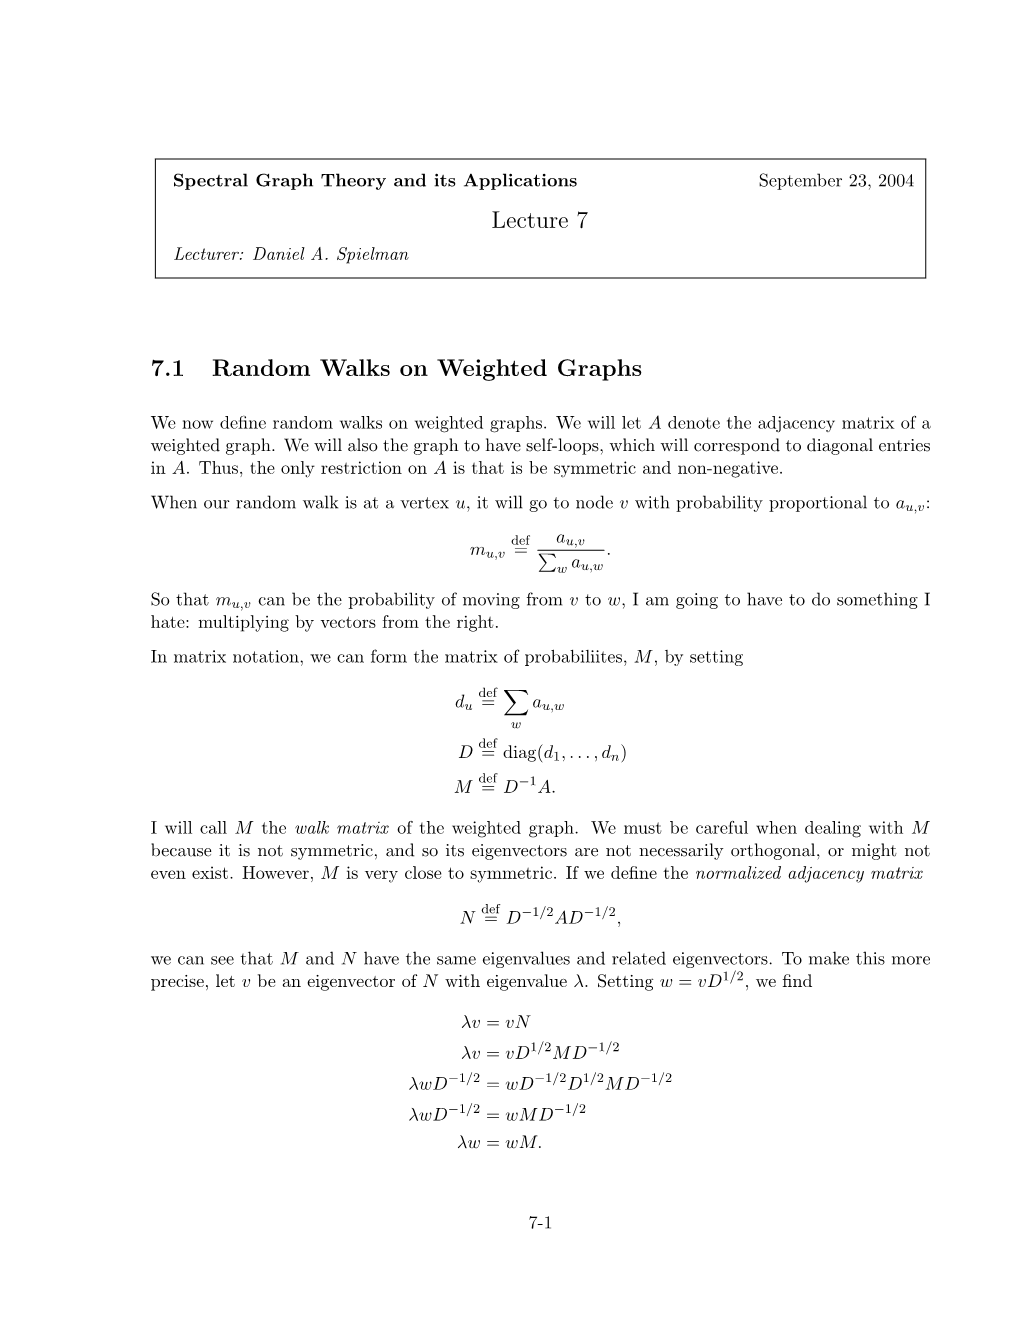 Lecture 7 7.1 Random Walks on Weighted Graphs